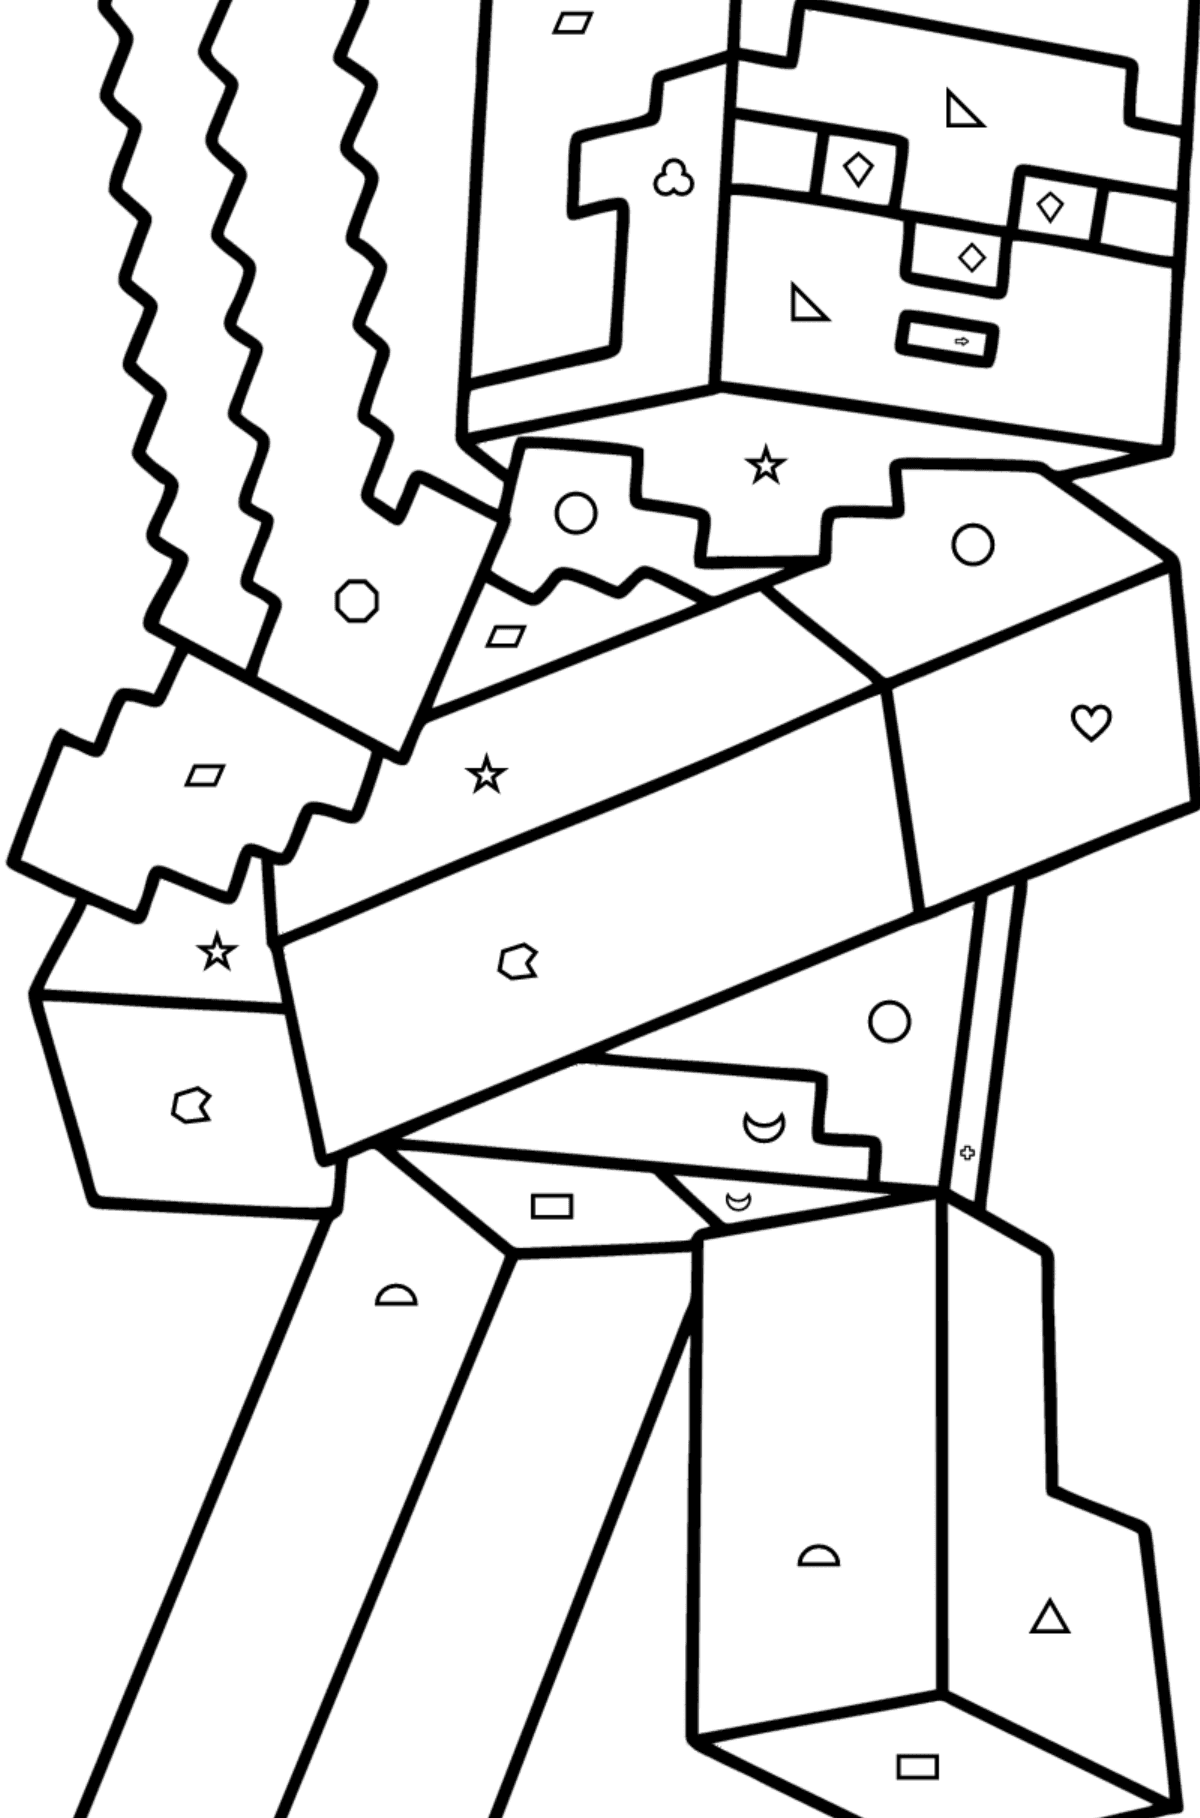 Minecraft Steve coloring page - Coloring by Geometric Shapes for Kids